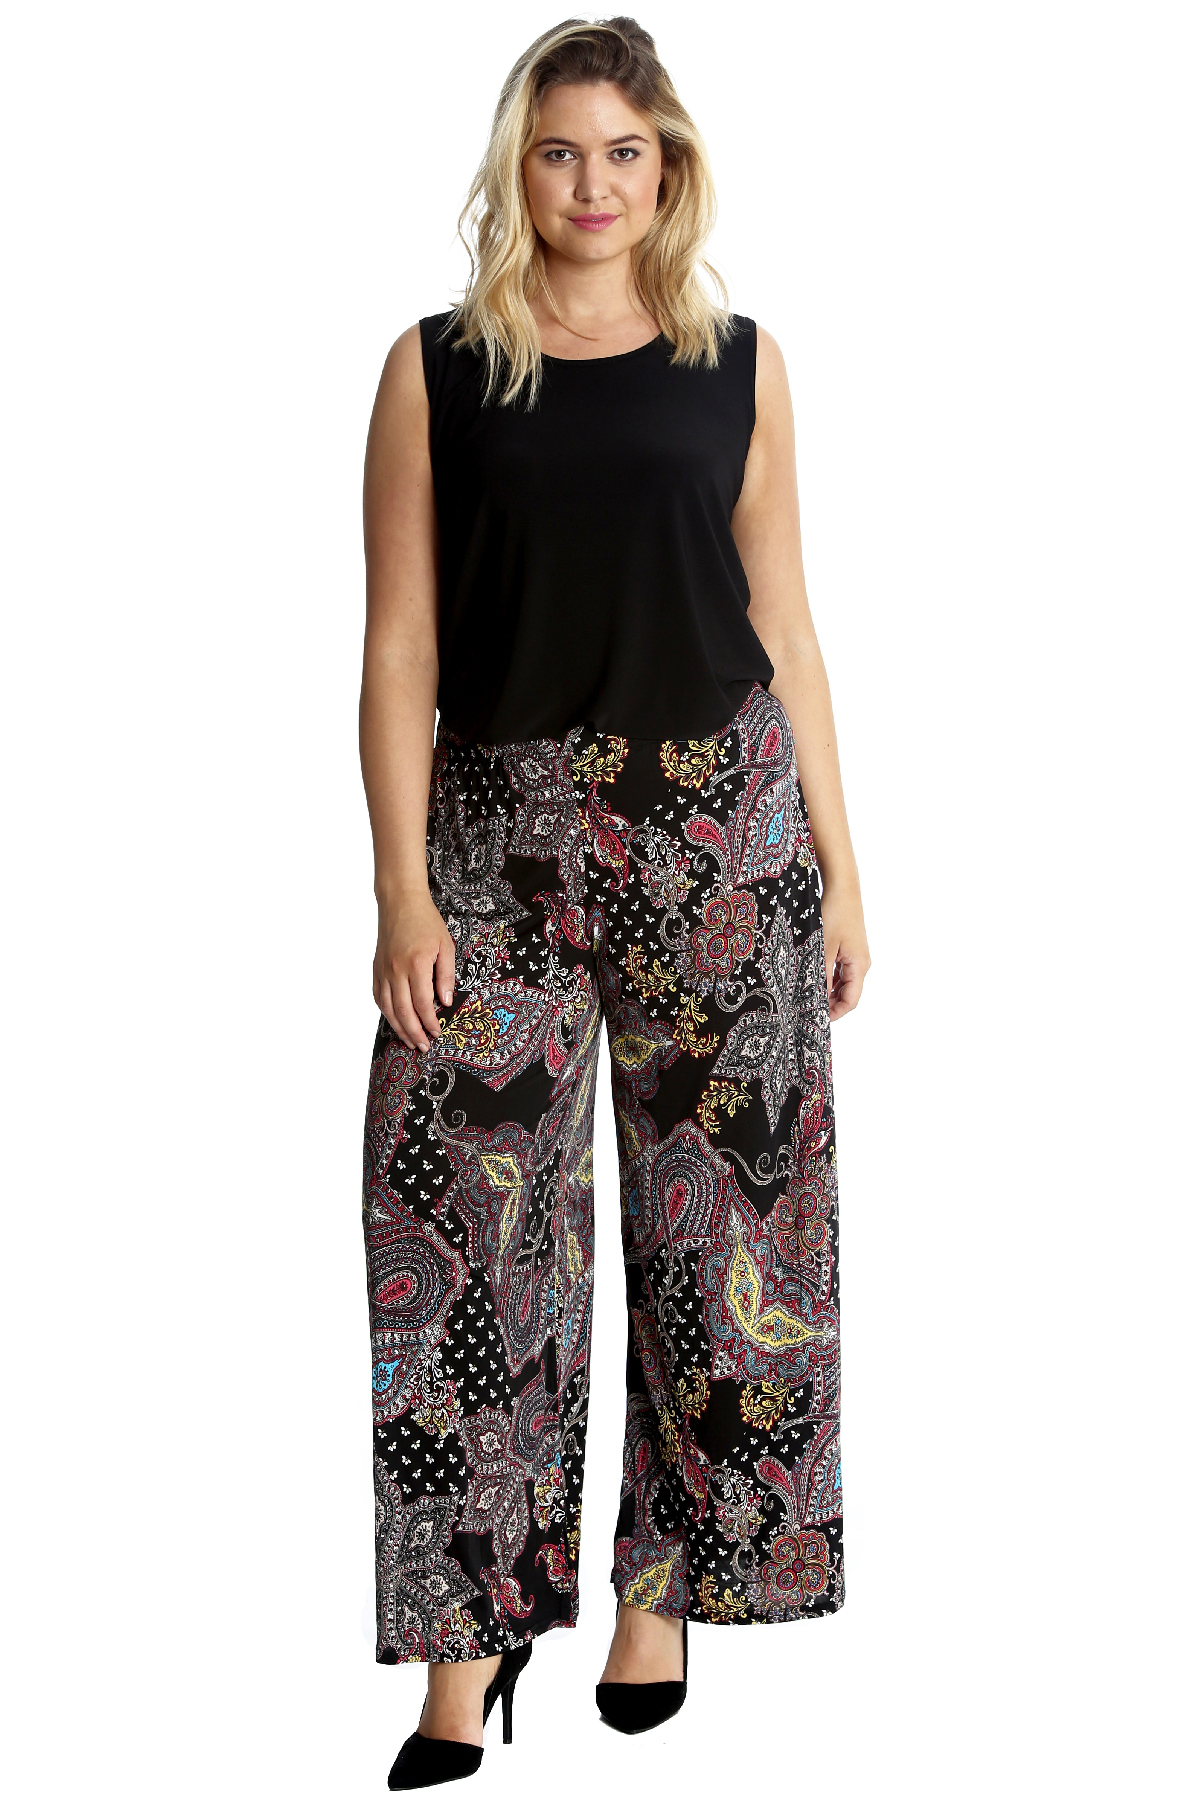 New Womens Plus Size Trousers Ladies Paisley Print Palazzo Pants Flared ...